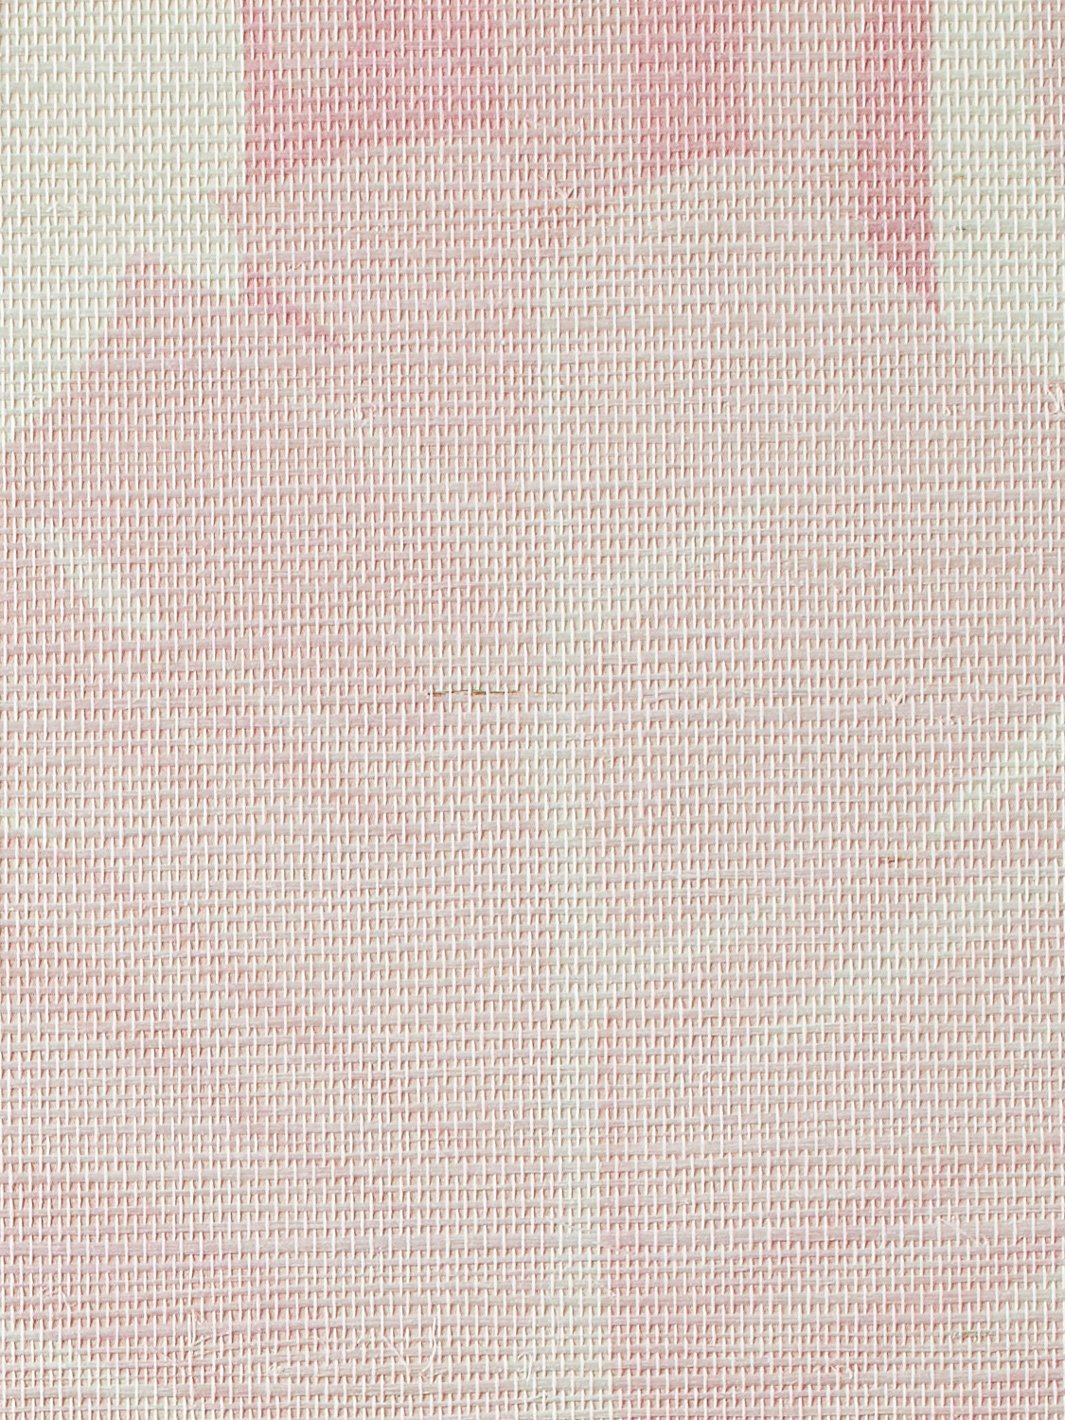 'Pacifico Palm' Grasscloth' Wallpaper by Nathan Turner - Garcelle Pink